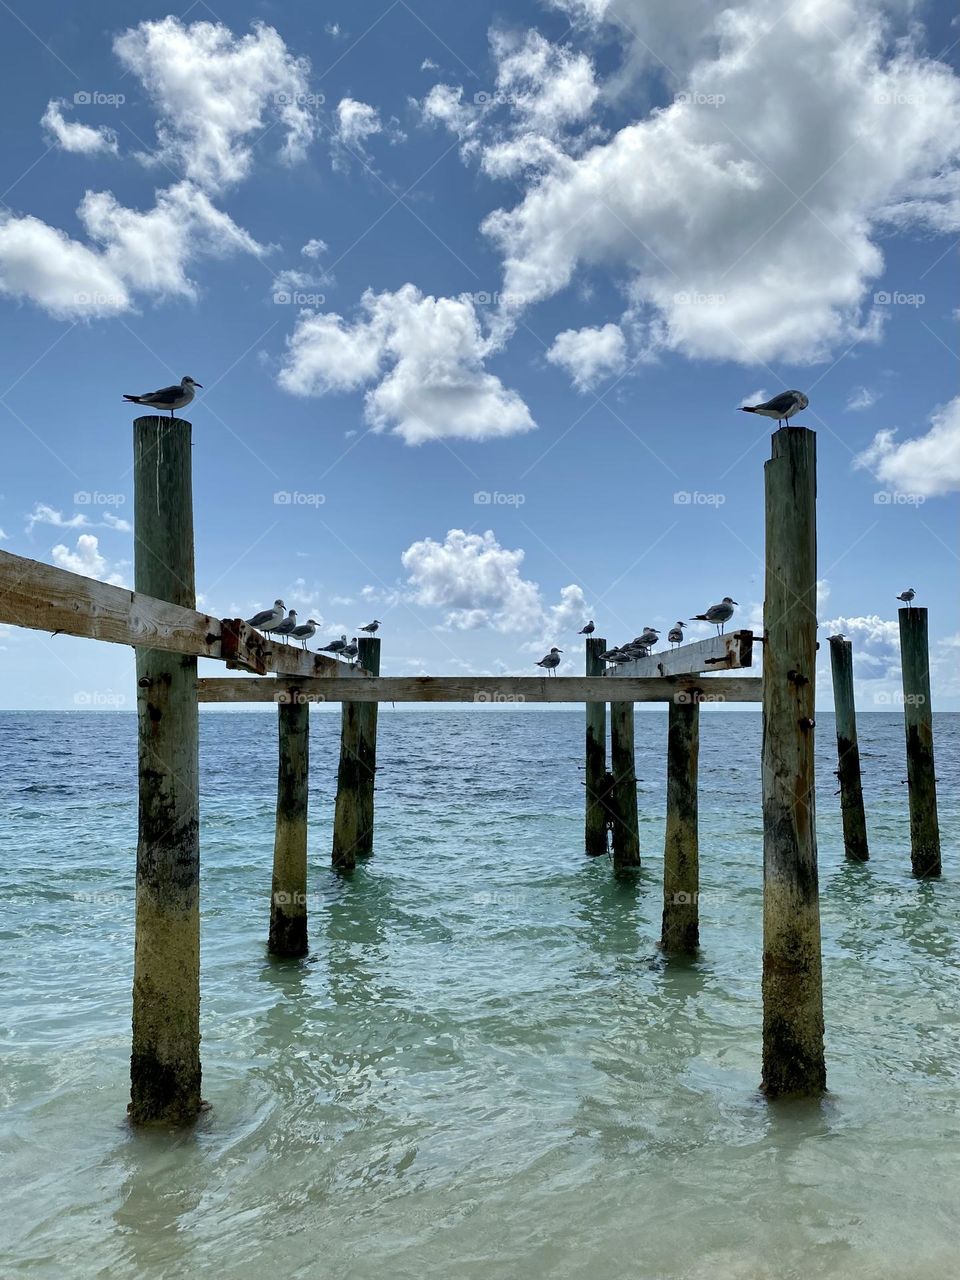 An old wooden pier at the beach covered with seagulls